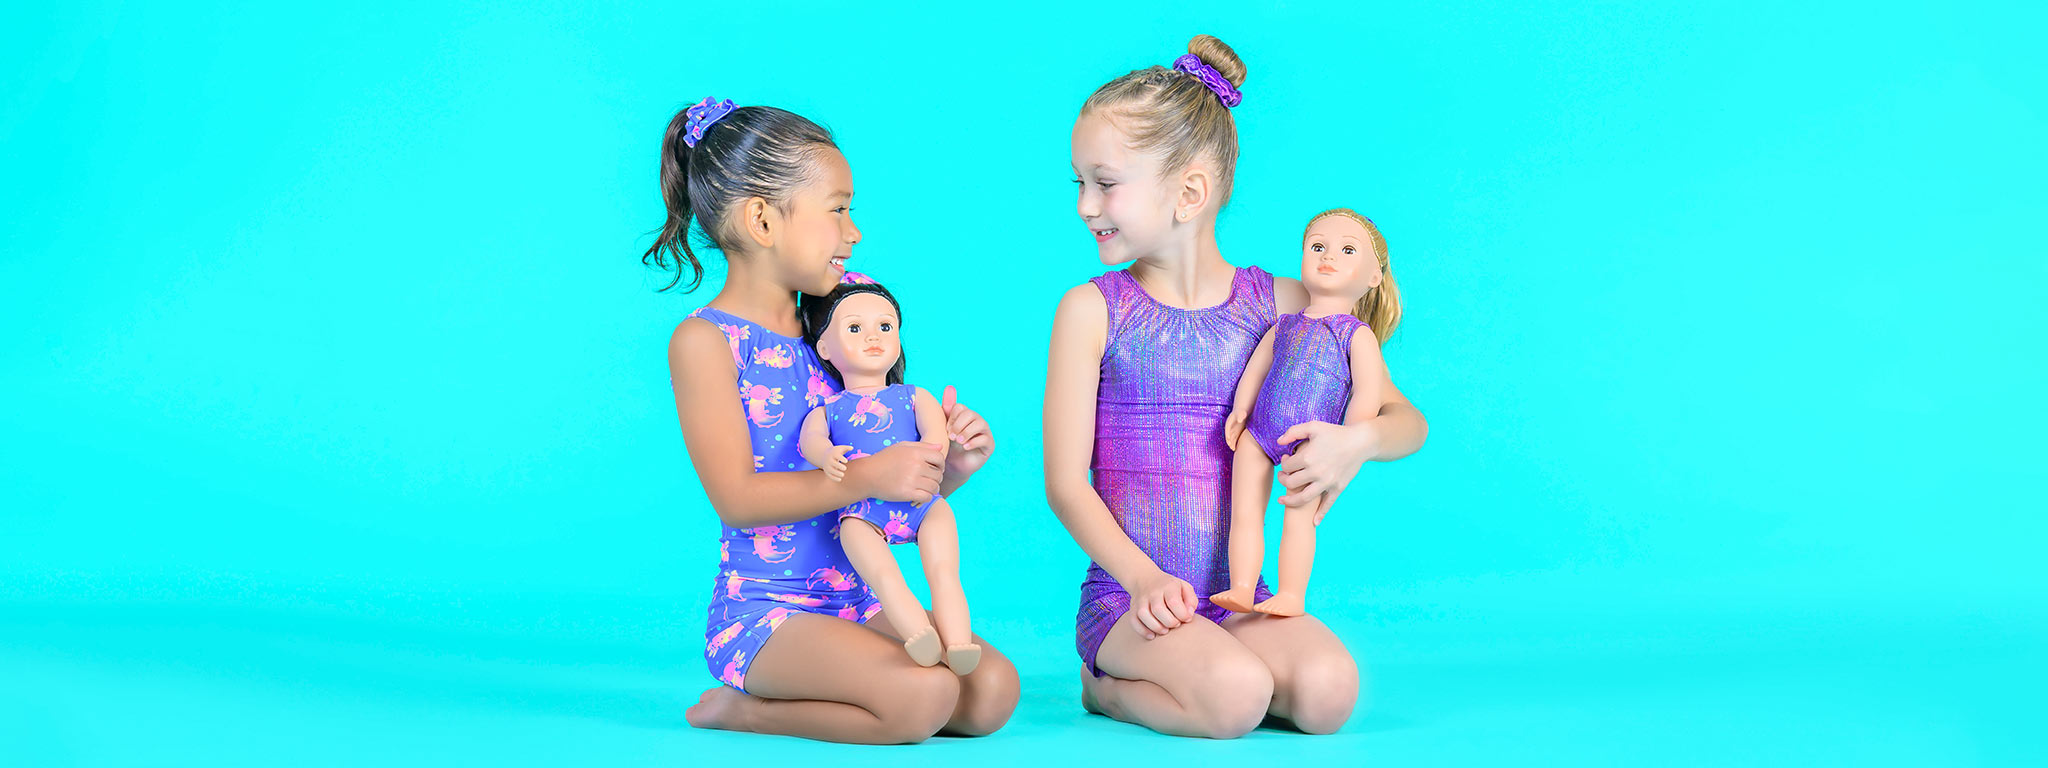 Matching gymnastics apparel and doll leotards for toddlers by Destira, 2023